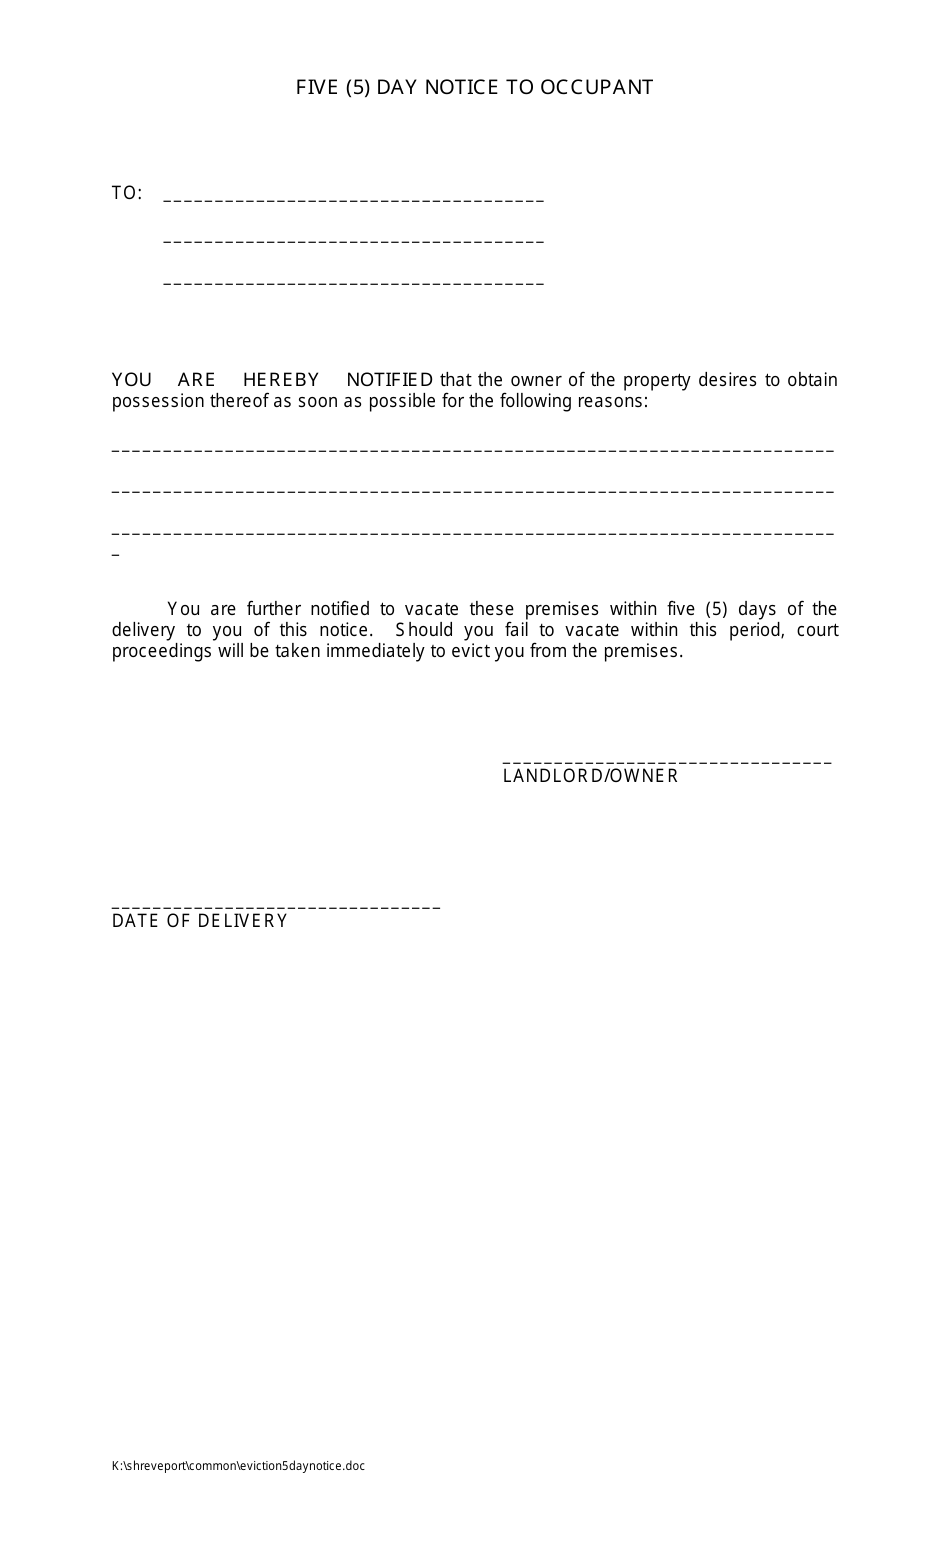 Five (5) Day Notice to Occupant Form, Page 1